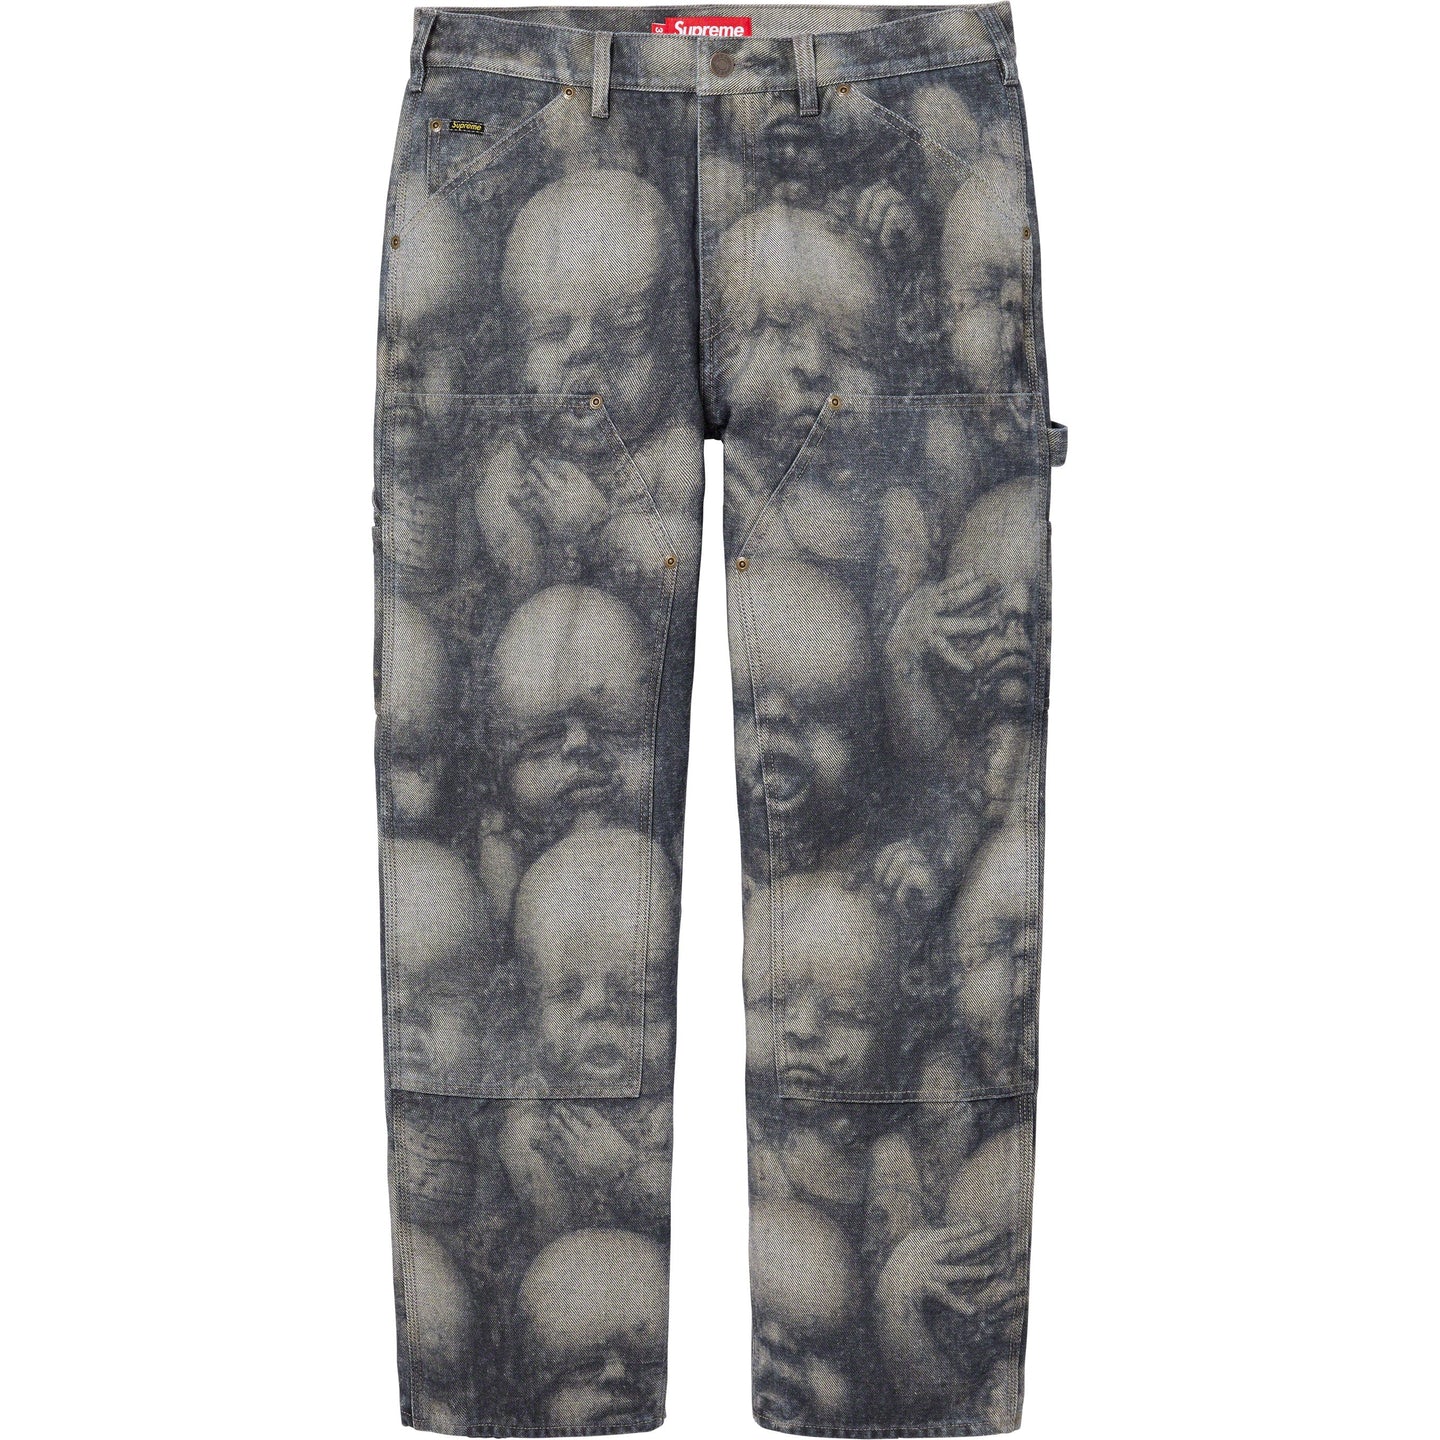 Supreme H.R. Giger Double Knee Jean